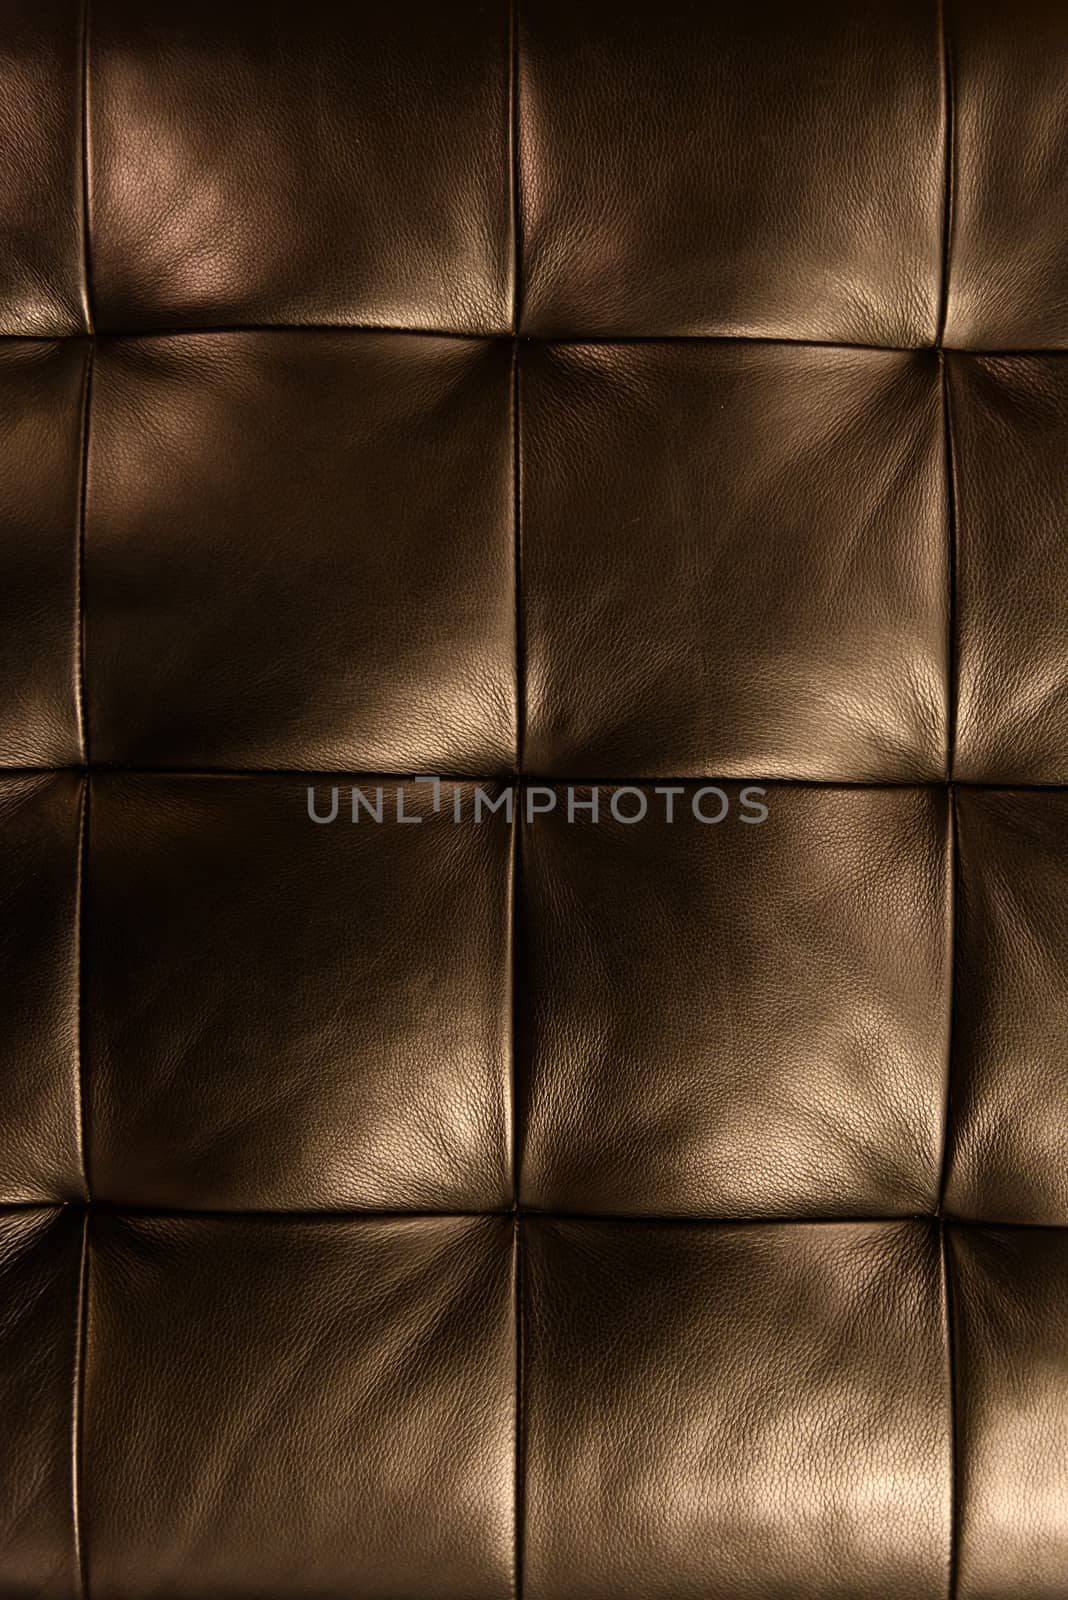 Luxury brown leather close-up background by jakgree